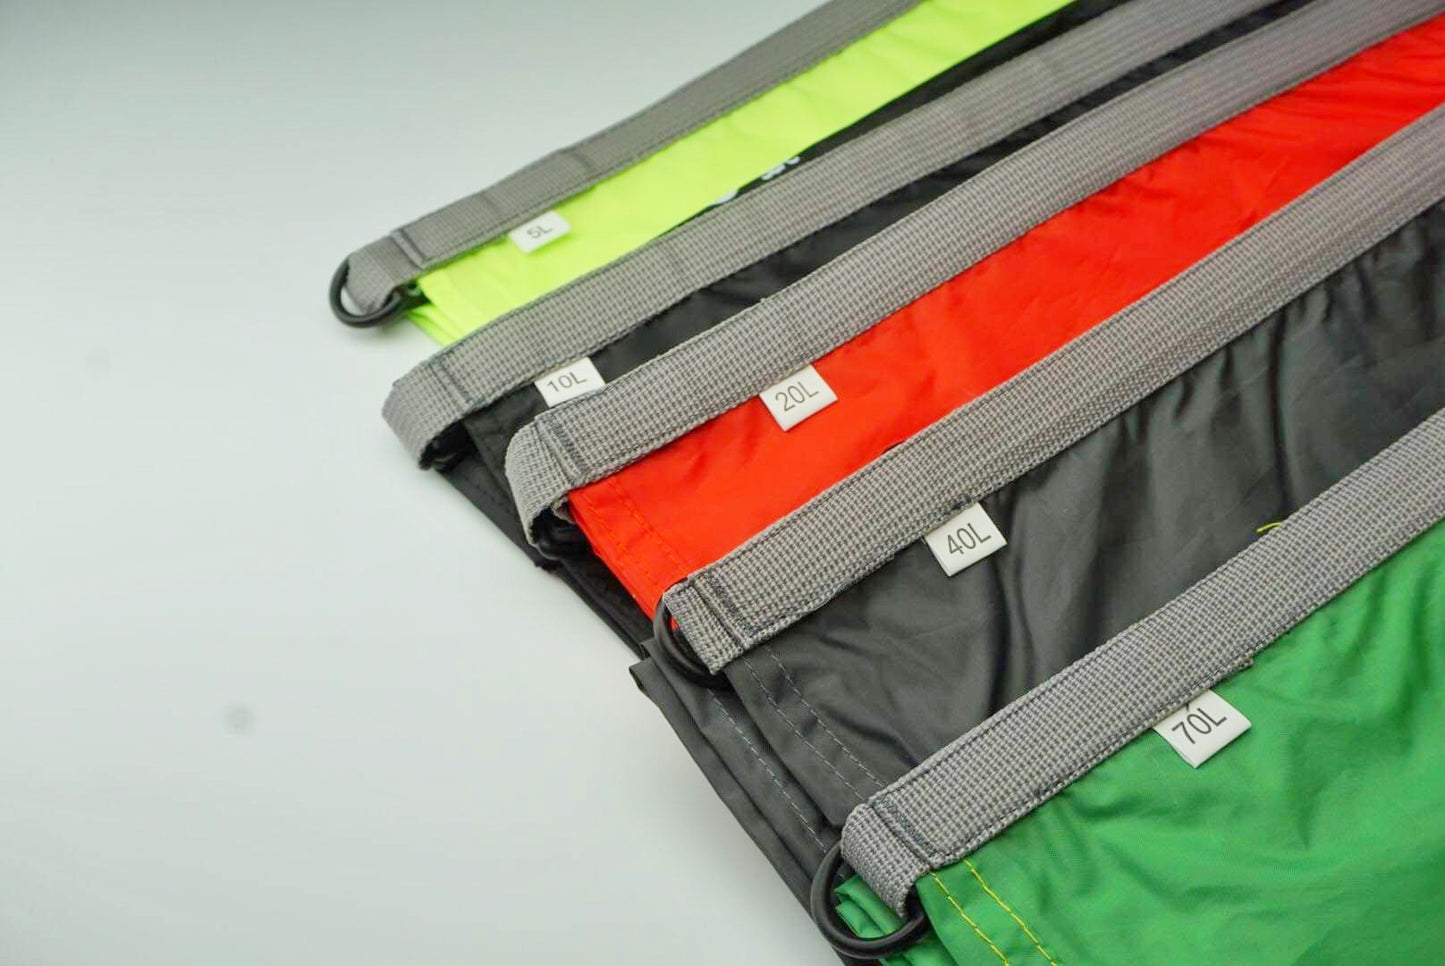 Geartrade Polyester Dry Bags